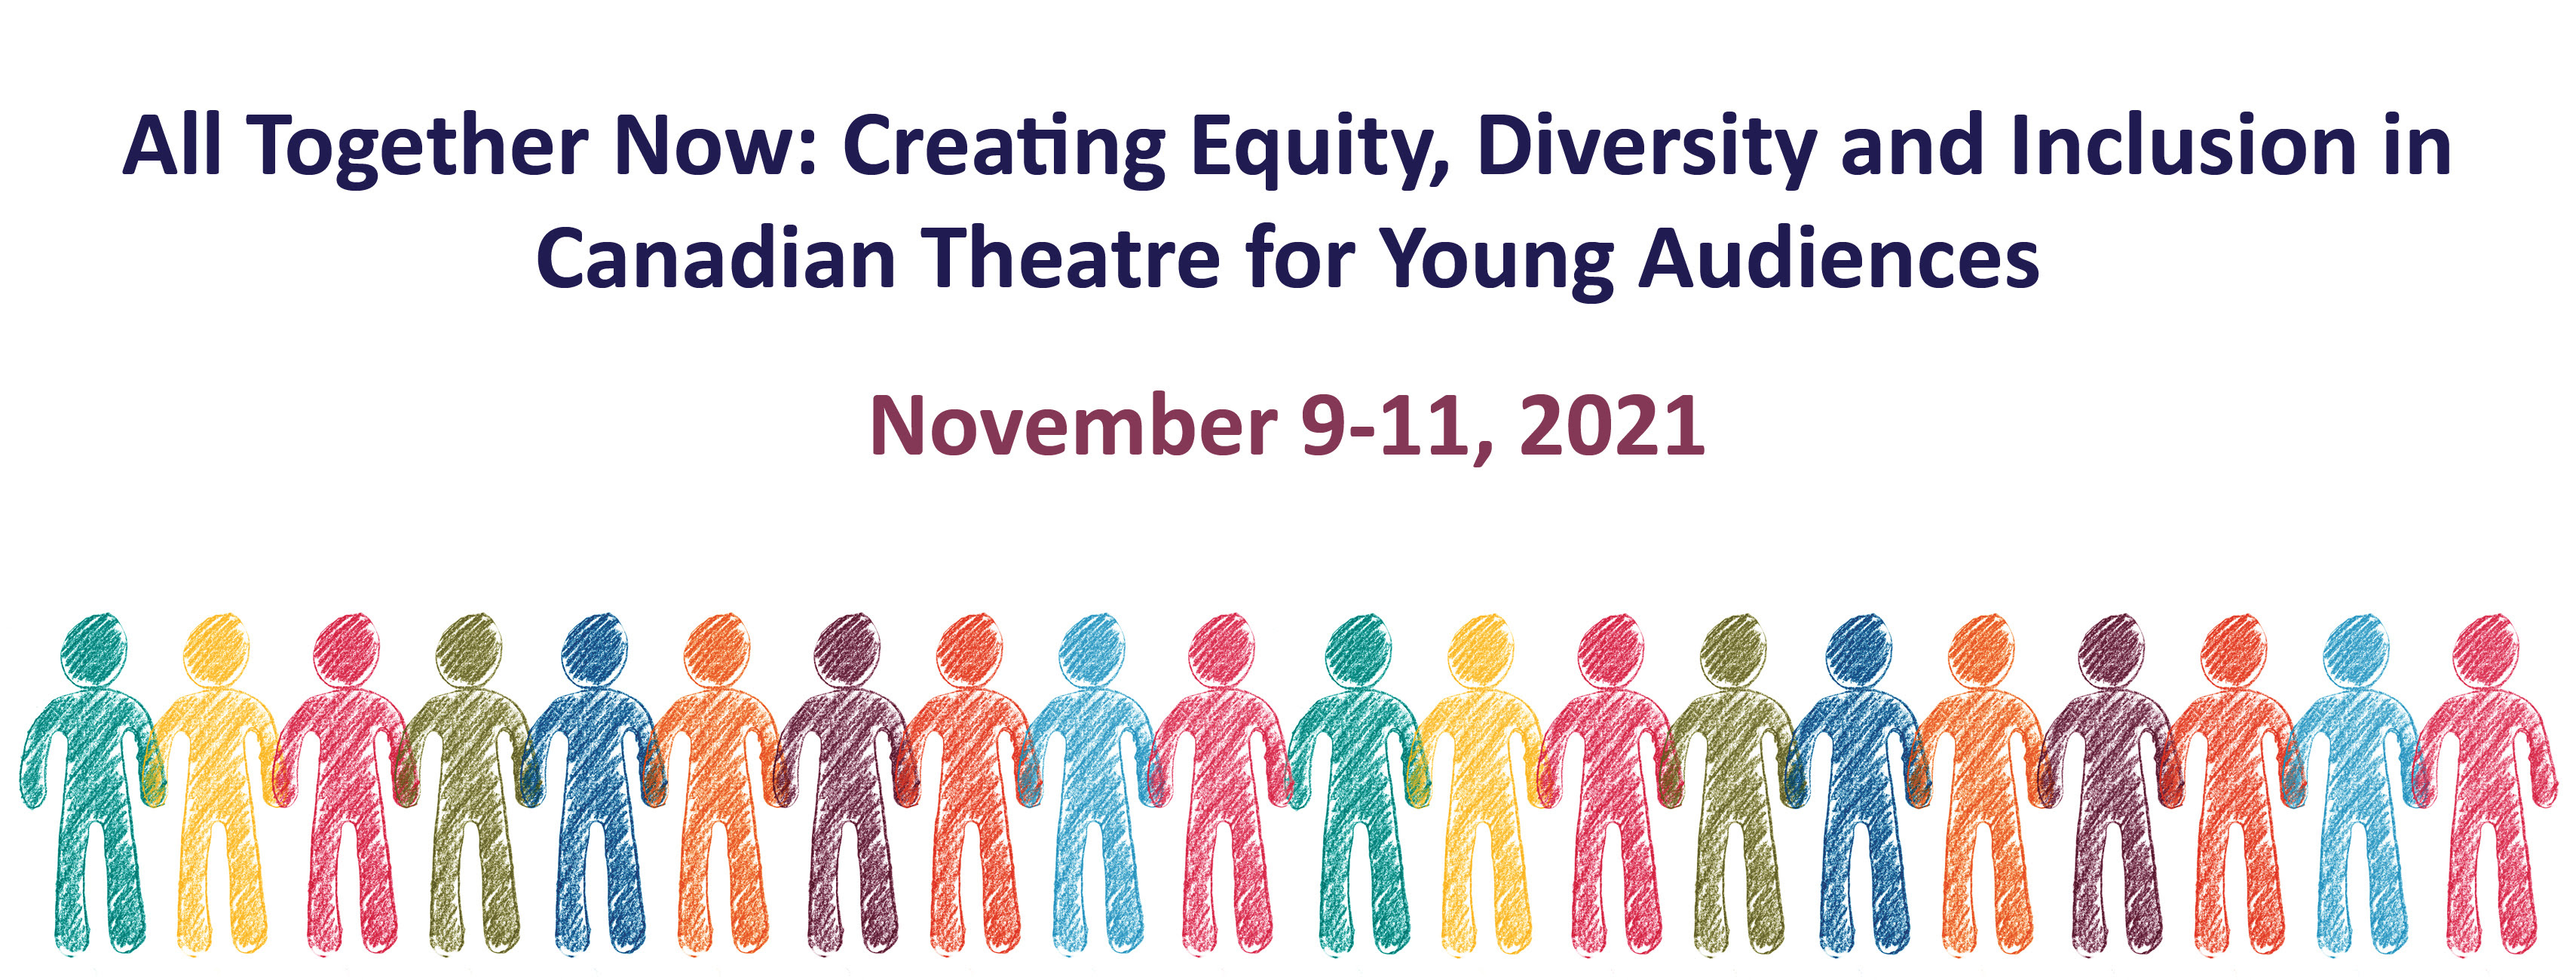 All Together Now: Creating Equity, Diversity and Inclusion in Canadian Theatre for Young Audiences, November 9-11, 2021 via Zoom. Beneath the text 20 abstract figures in different colours holding hands, figures look like drawn with pencils.